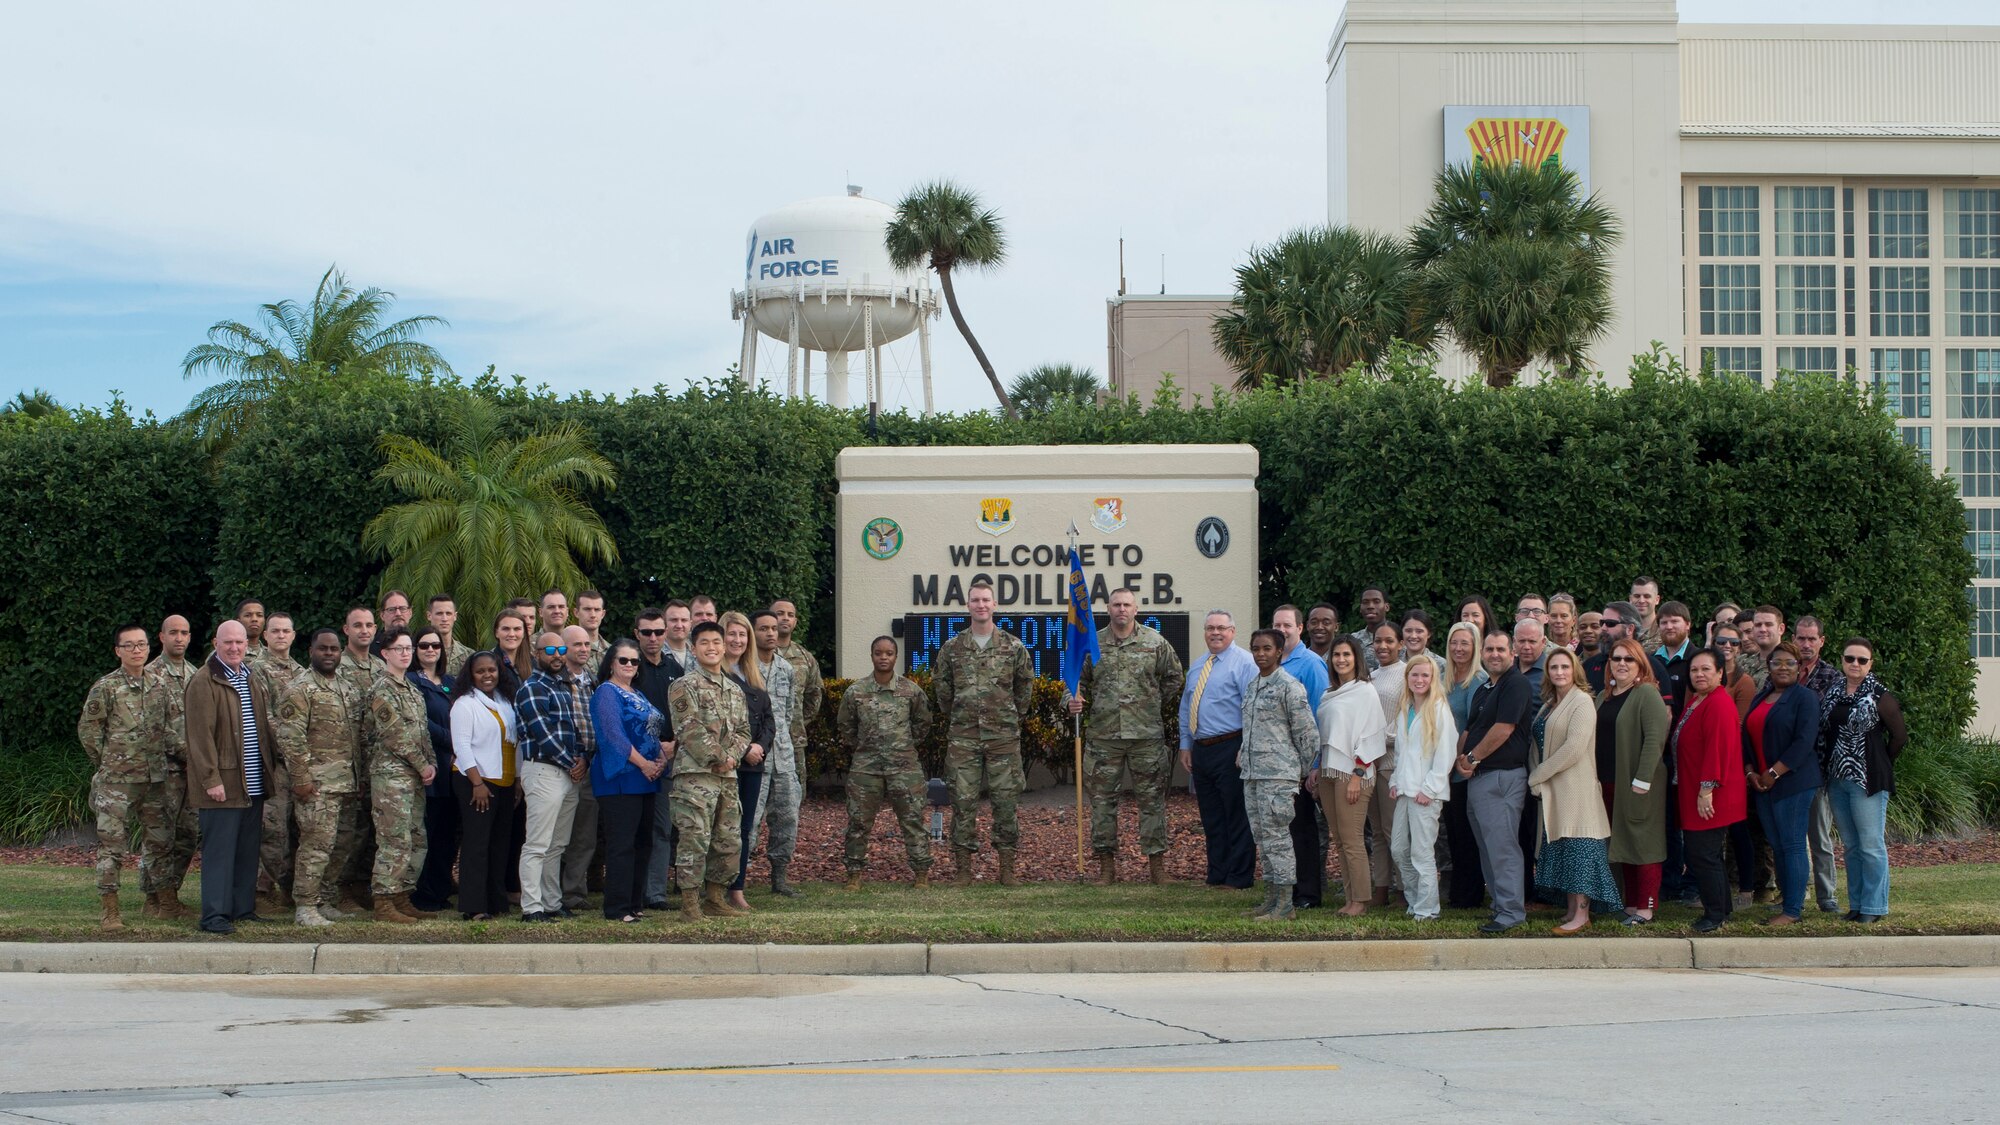 Members of the 6th Contracting Squadron (CONS), pose for a photo Dec. 5, 2019, at MacDill Air Force Base, Fla. The 6th CONS won their third consecutive Air Mobility Command, Outstanding Operational Contracting Unit of the Year award for their world-class support of the AMC and Air Force operational acquisition enterprise.